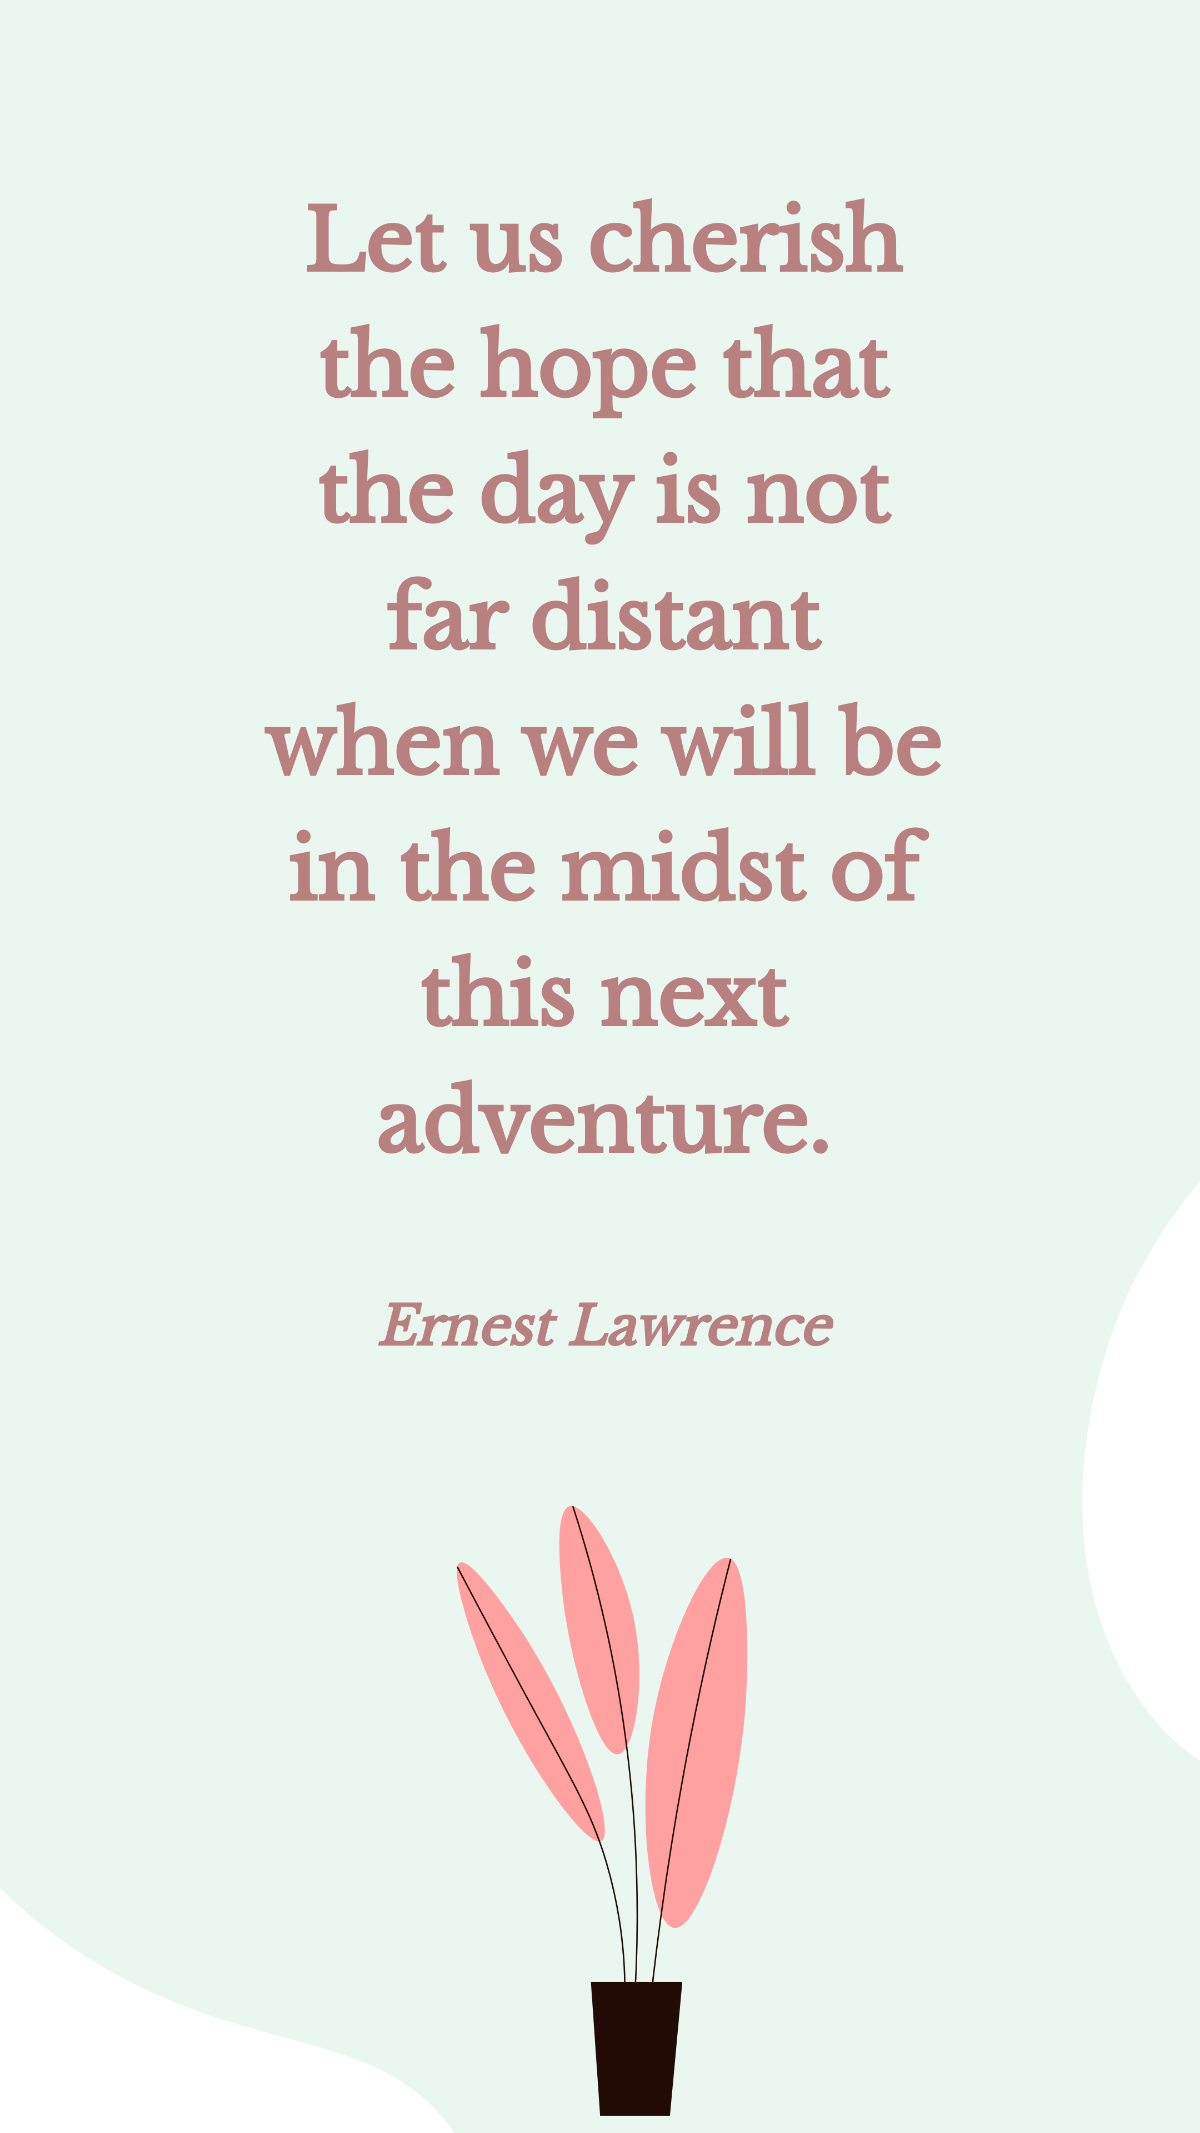 Free Ernest Lawrence - Let us cherish the hope that the day is not far distant when we will be in the midst of this next adventure. Template